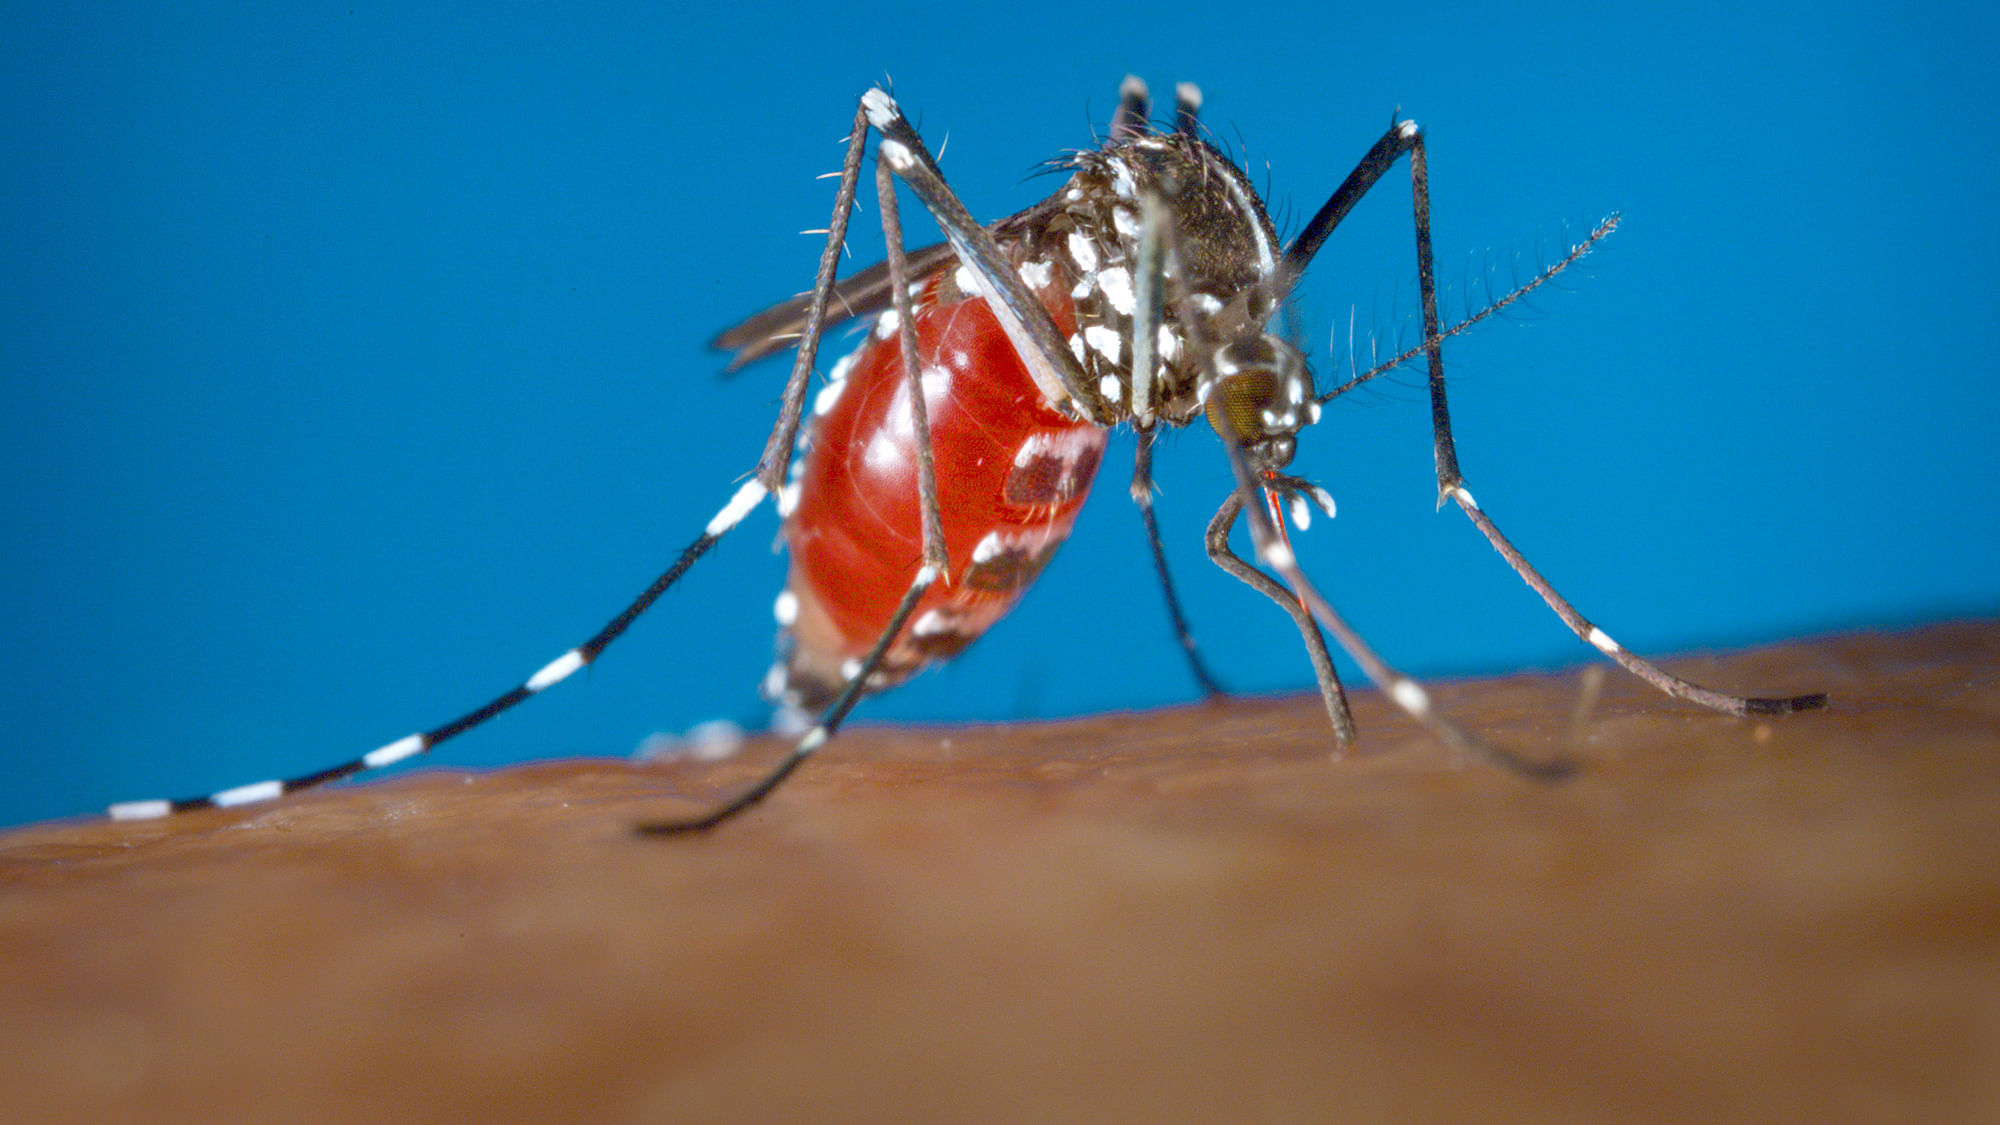 The Zika virus is spread through mosquito bites from Aedes aegypti and the CDC is investigating whether it is also spread by Aedes albopictus. (Photo: AP)